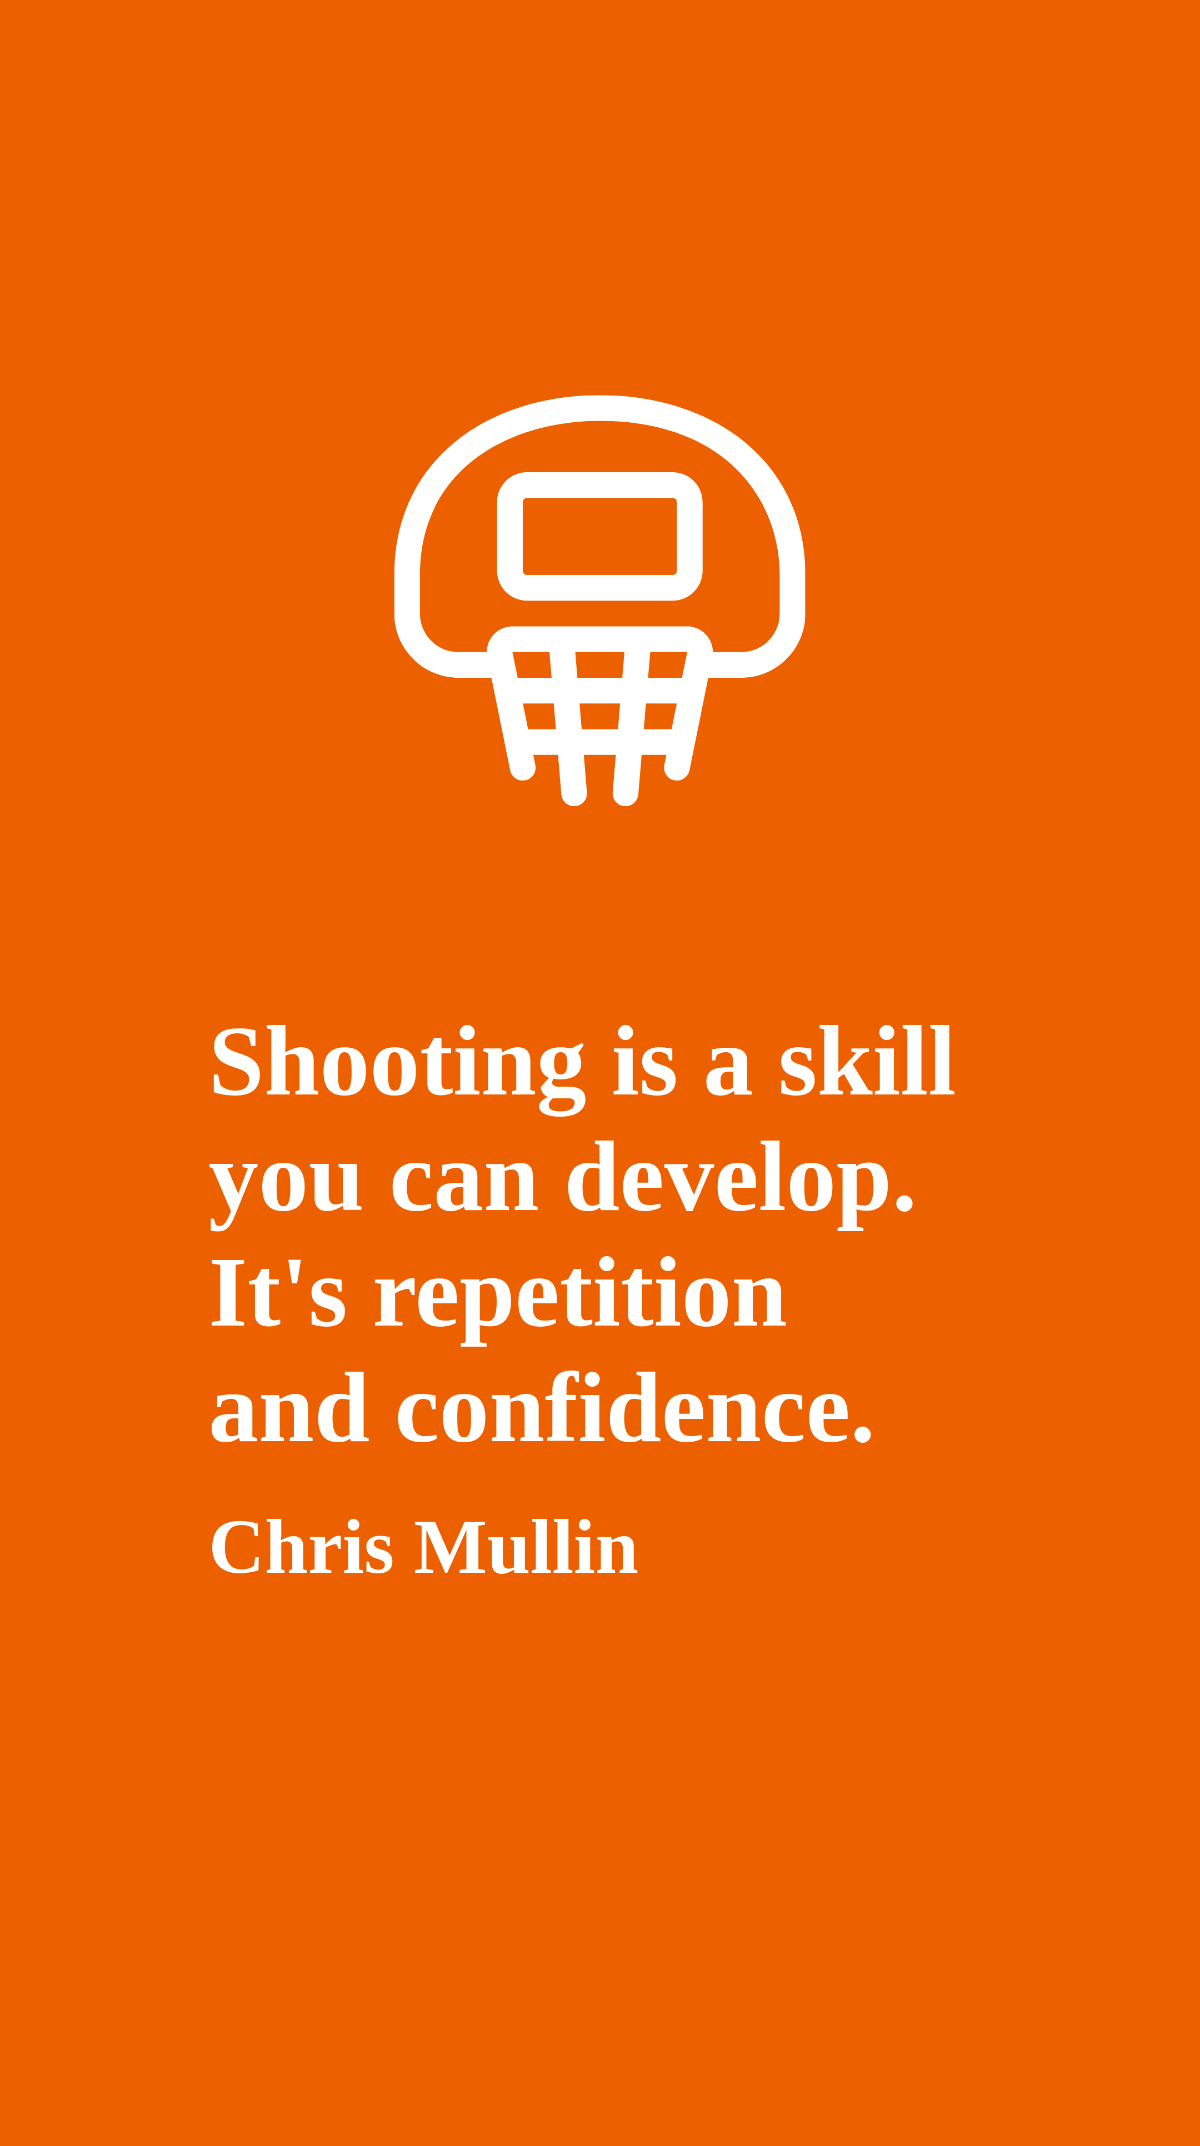 Chris Mullin - Shooting is a skill you can develop. It's repetition and confidence.